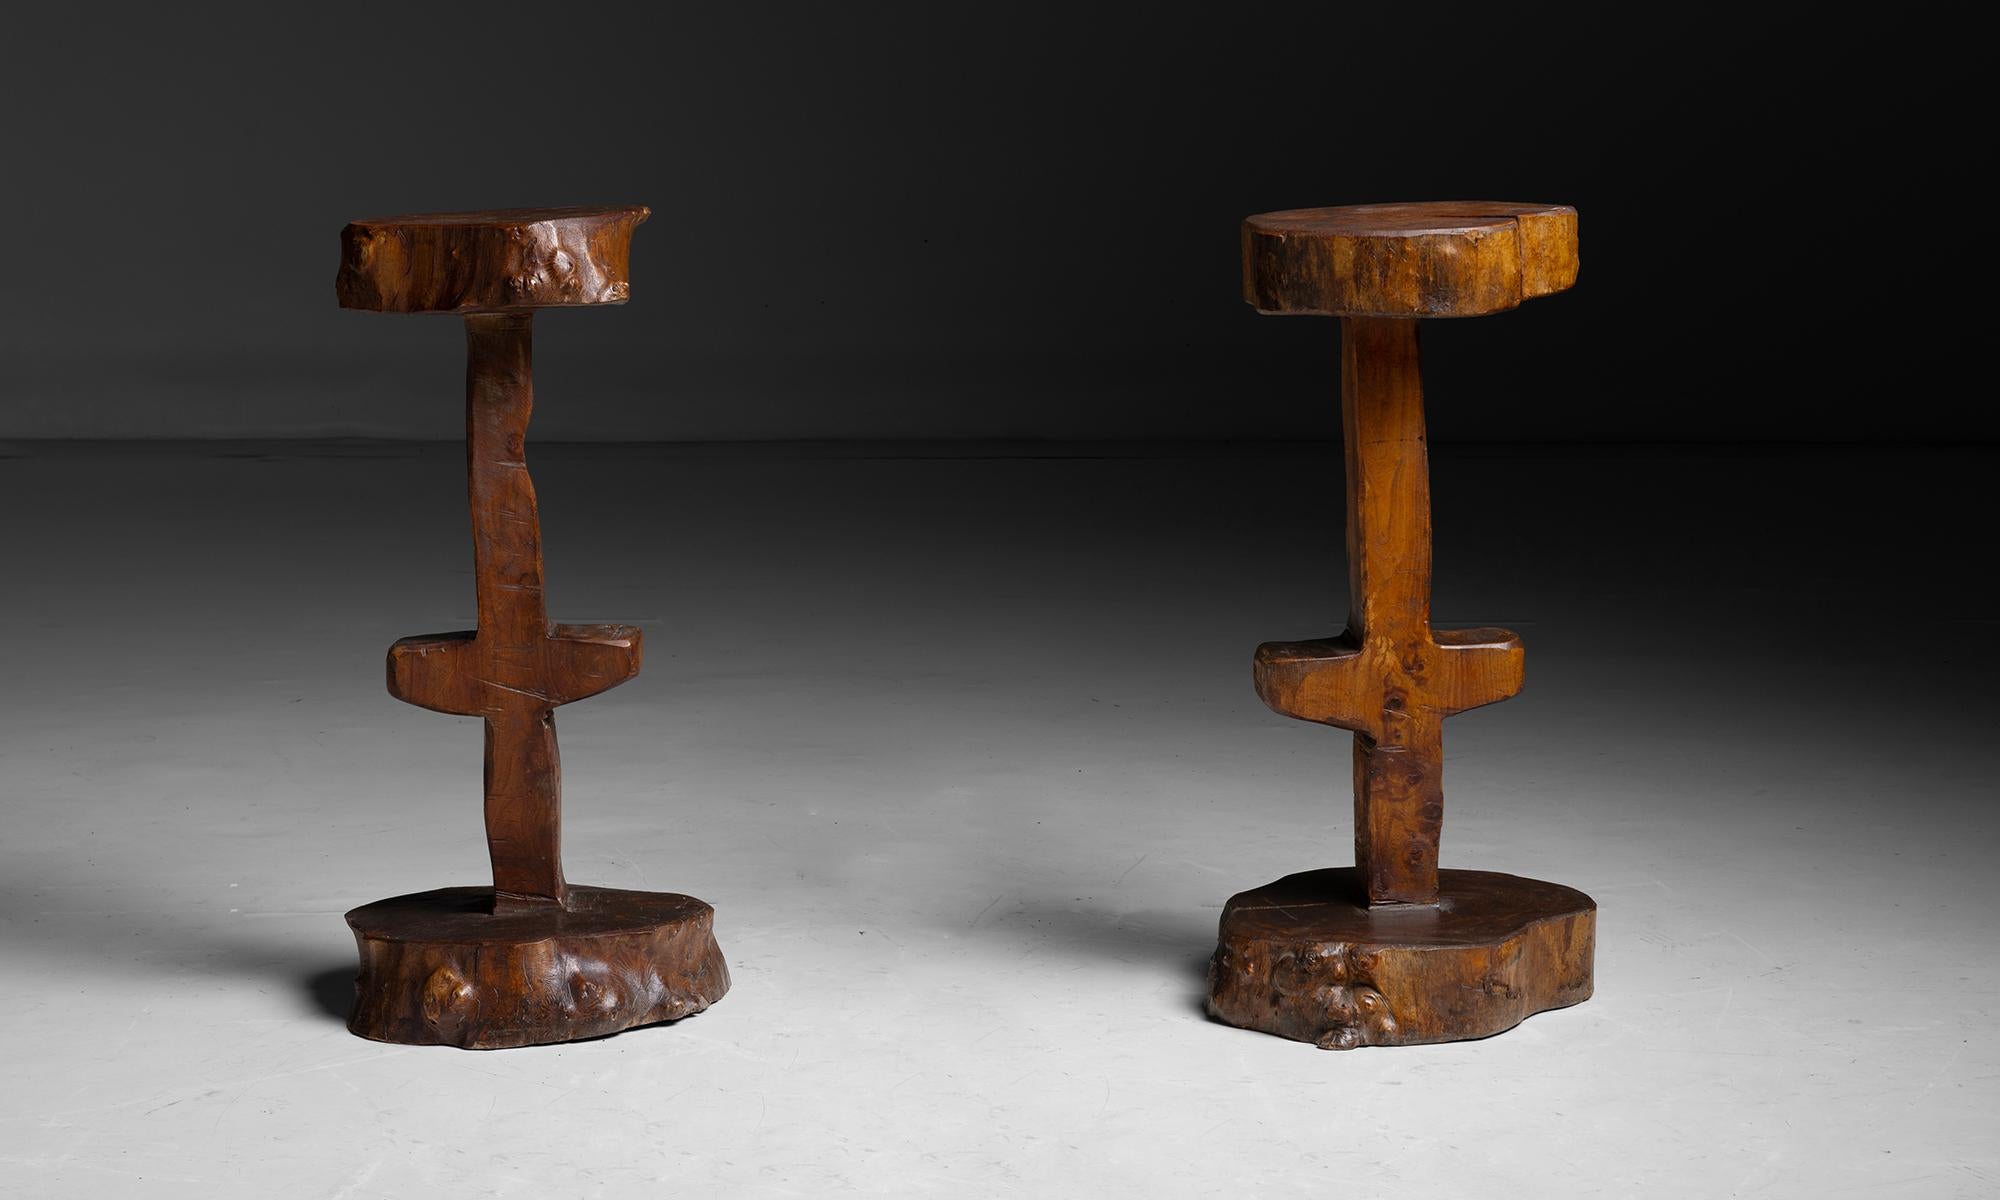 *Please note price is per unit, items sold separately*

Primitive Plinths

France circa 1960

Unique wooden stands carved from a solid trunk of wood.

Measures 16”dia x 30”h

